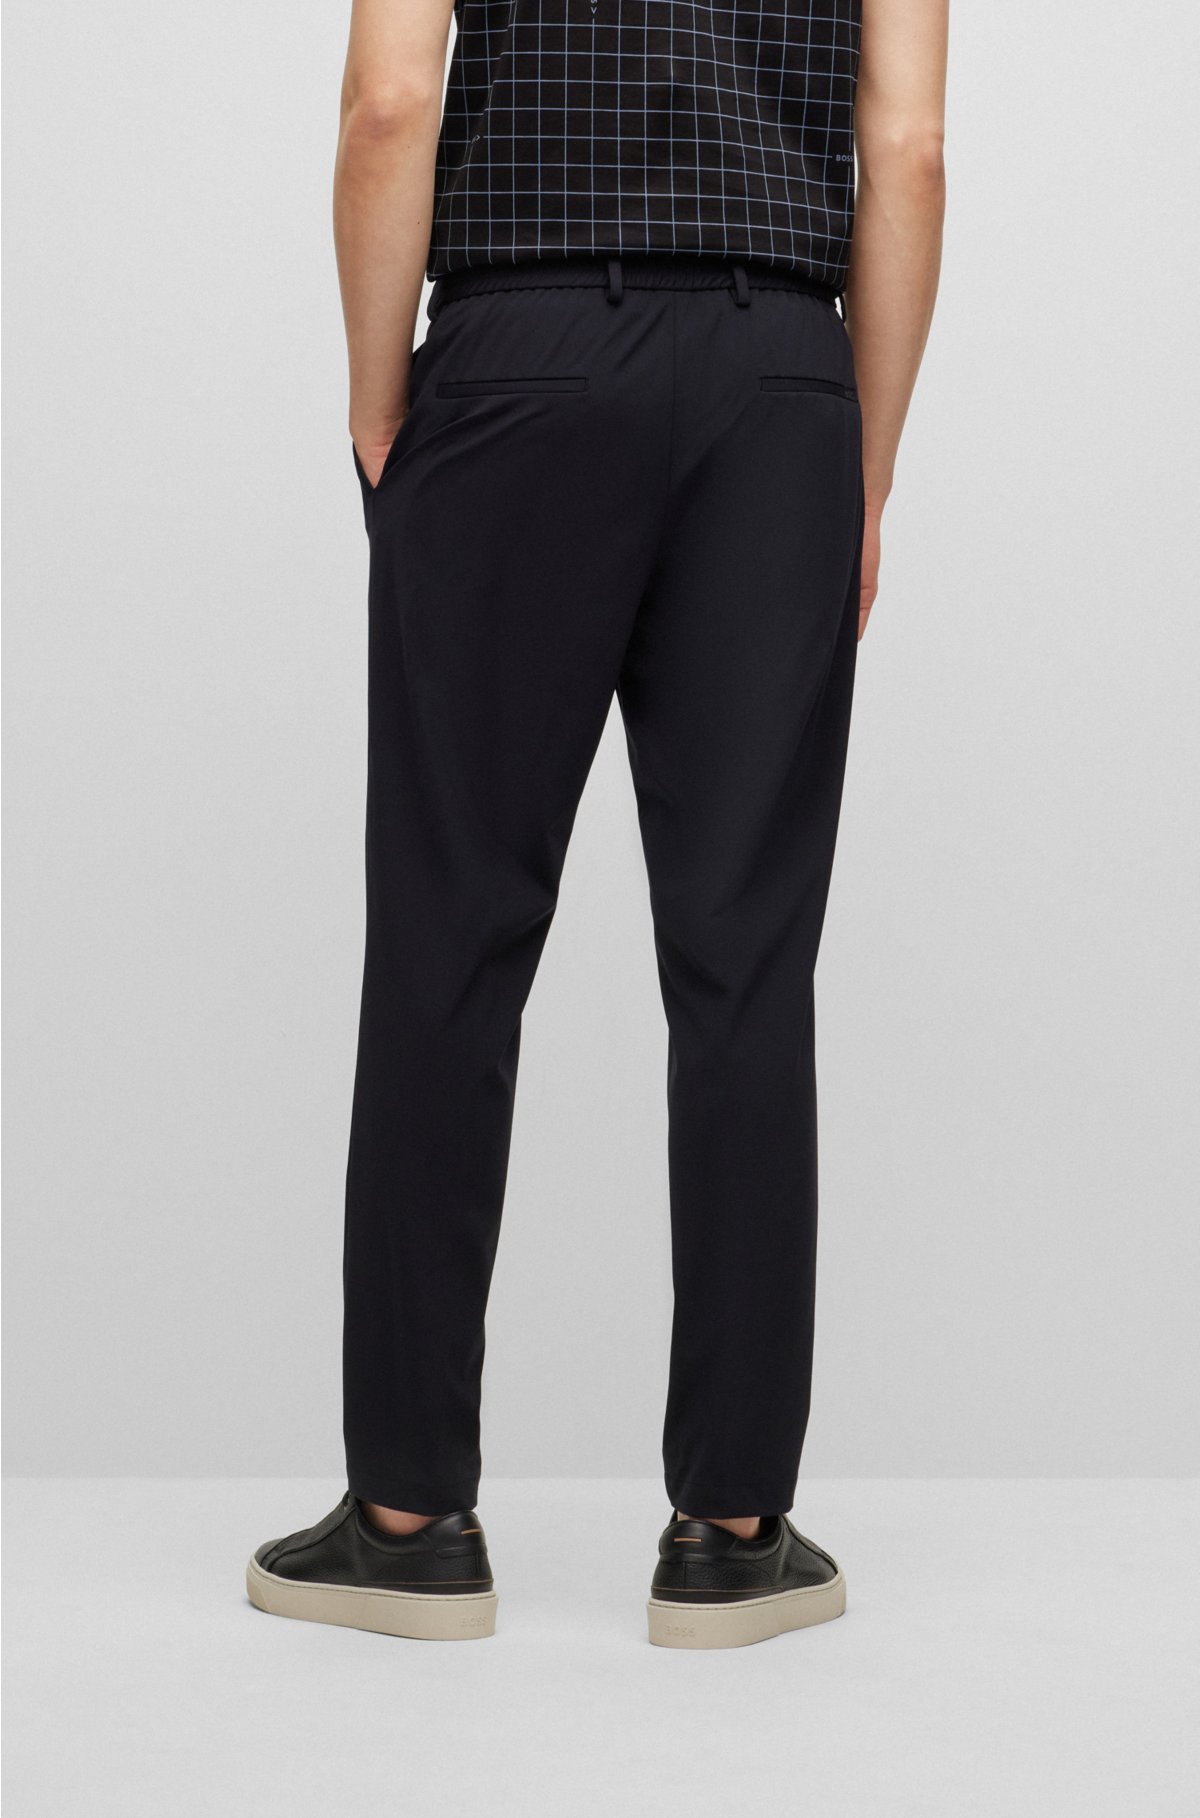 BOSS trousers performance-stretch jersey - in Slim-fit